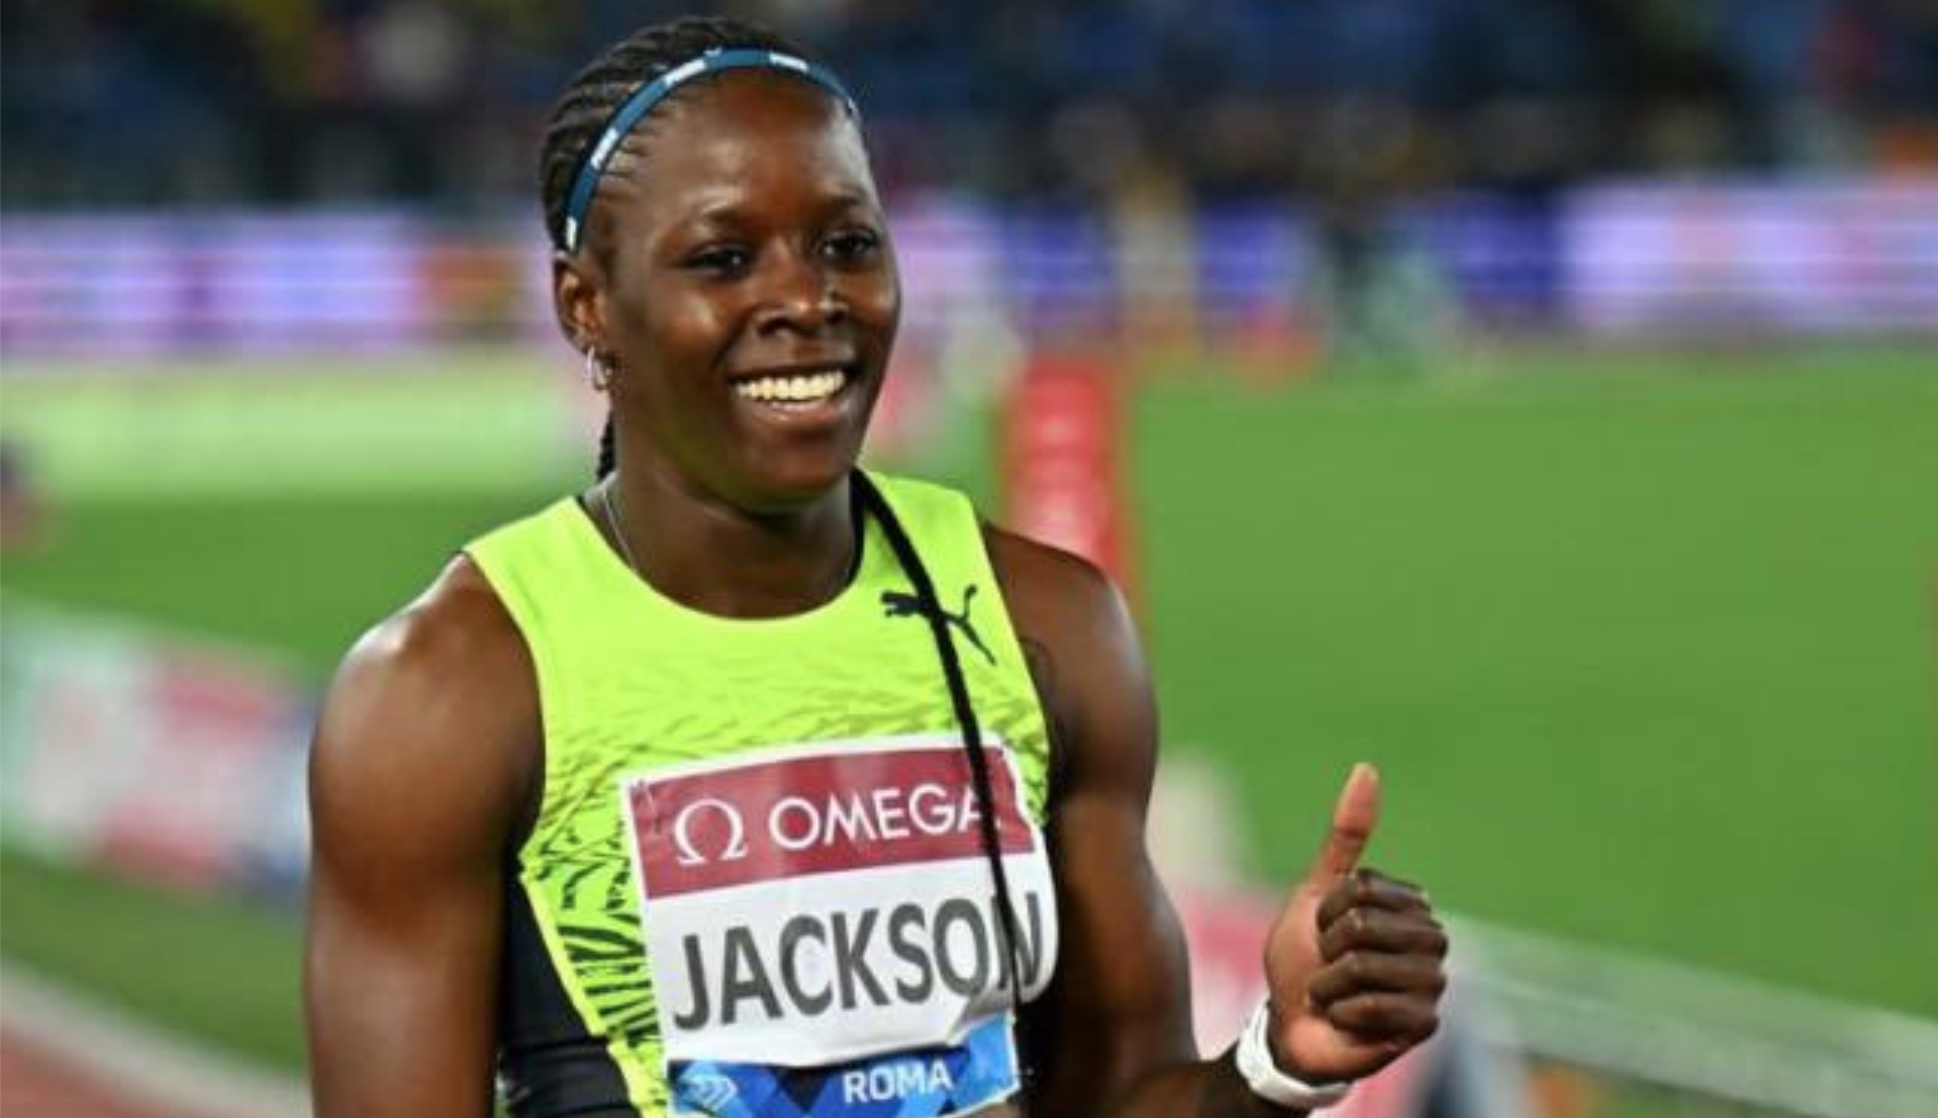 Shericka Jackson Finishes 2nd After Thompson-Herah False Start in the Women’s 100m Final at the Lausanne Diamond League 2022 – Watch Race